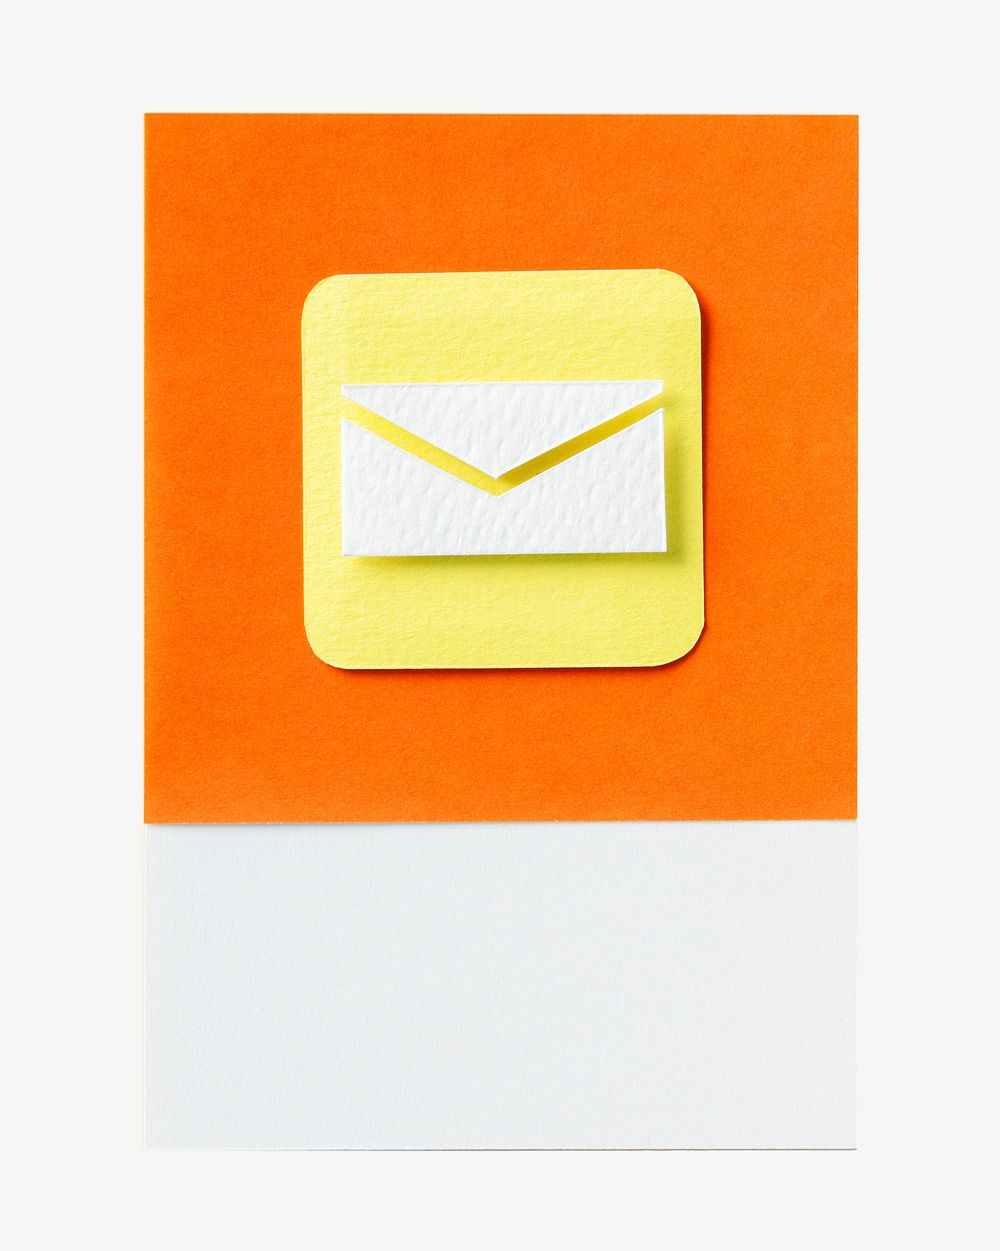 Email inbox envelope icon collage element psd